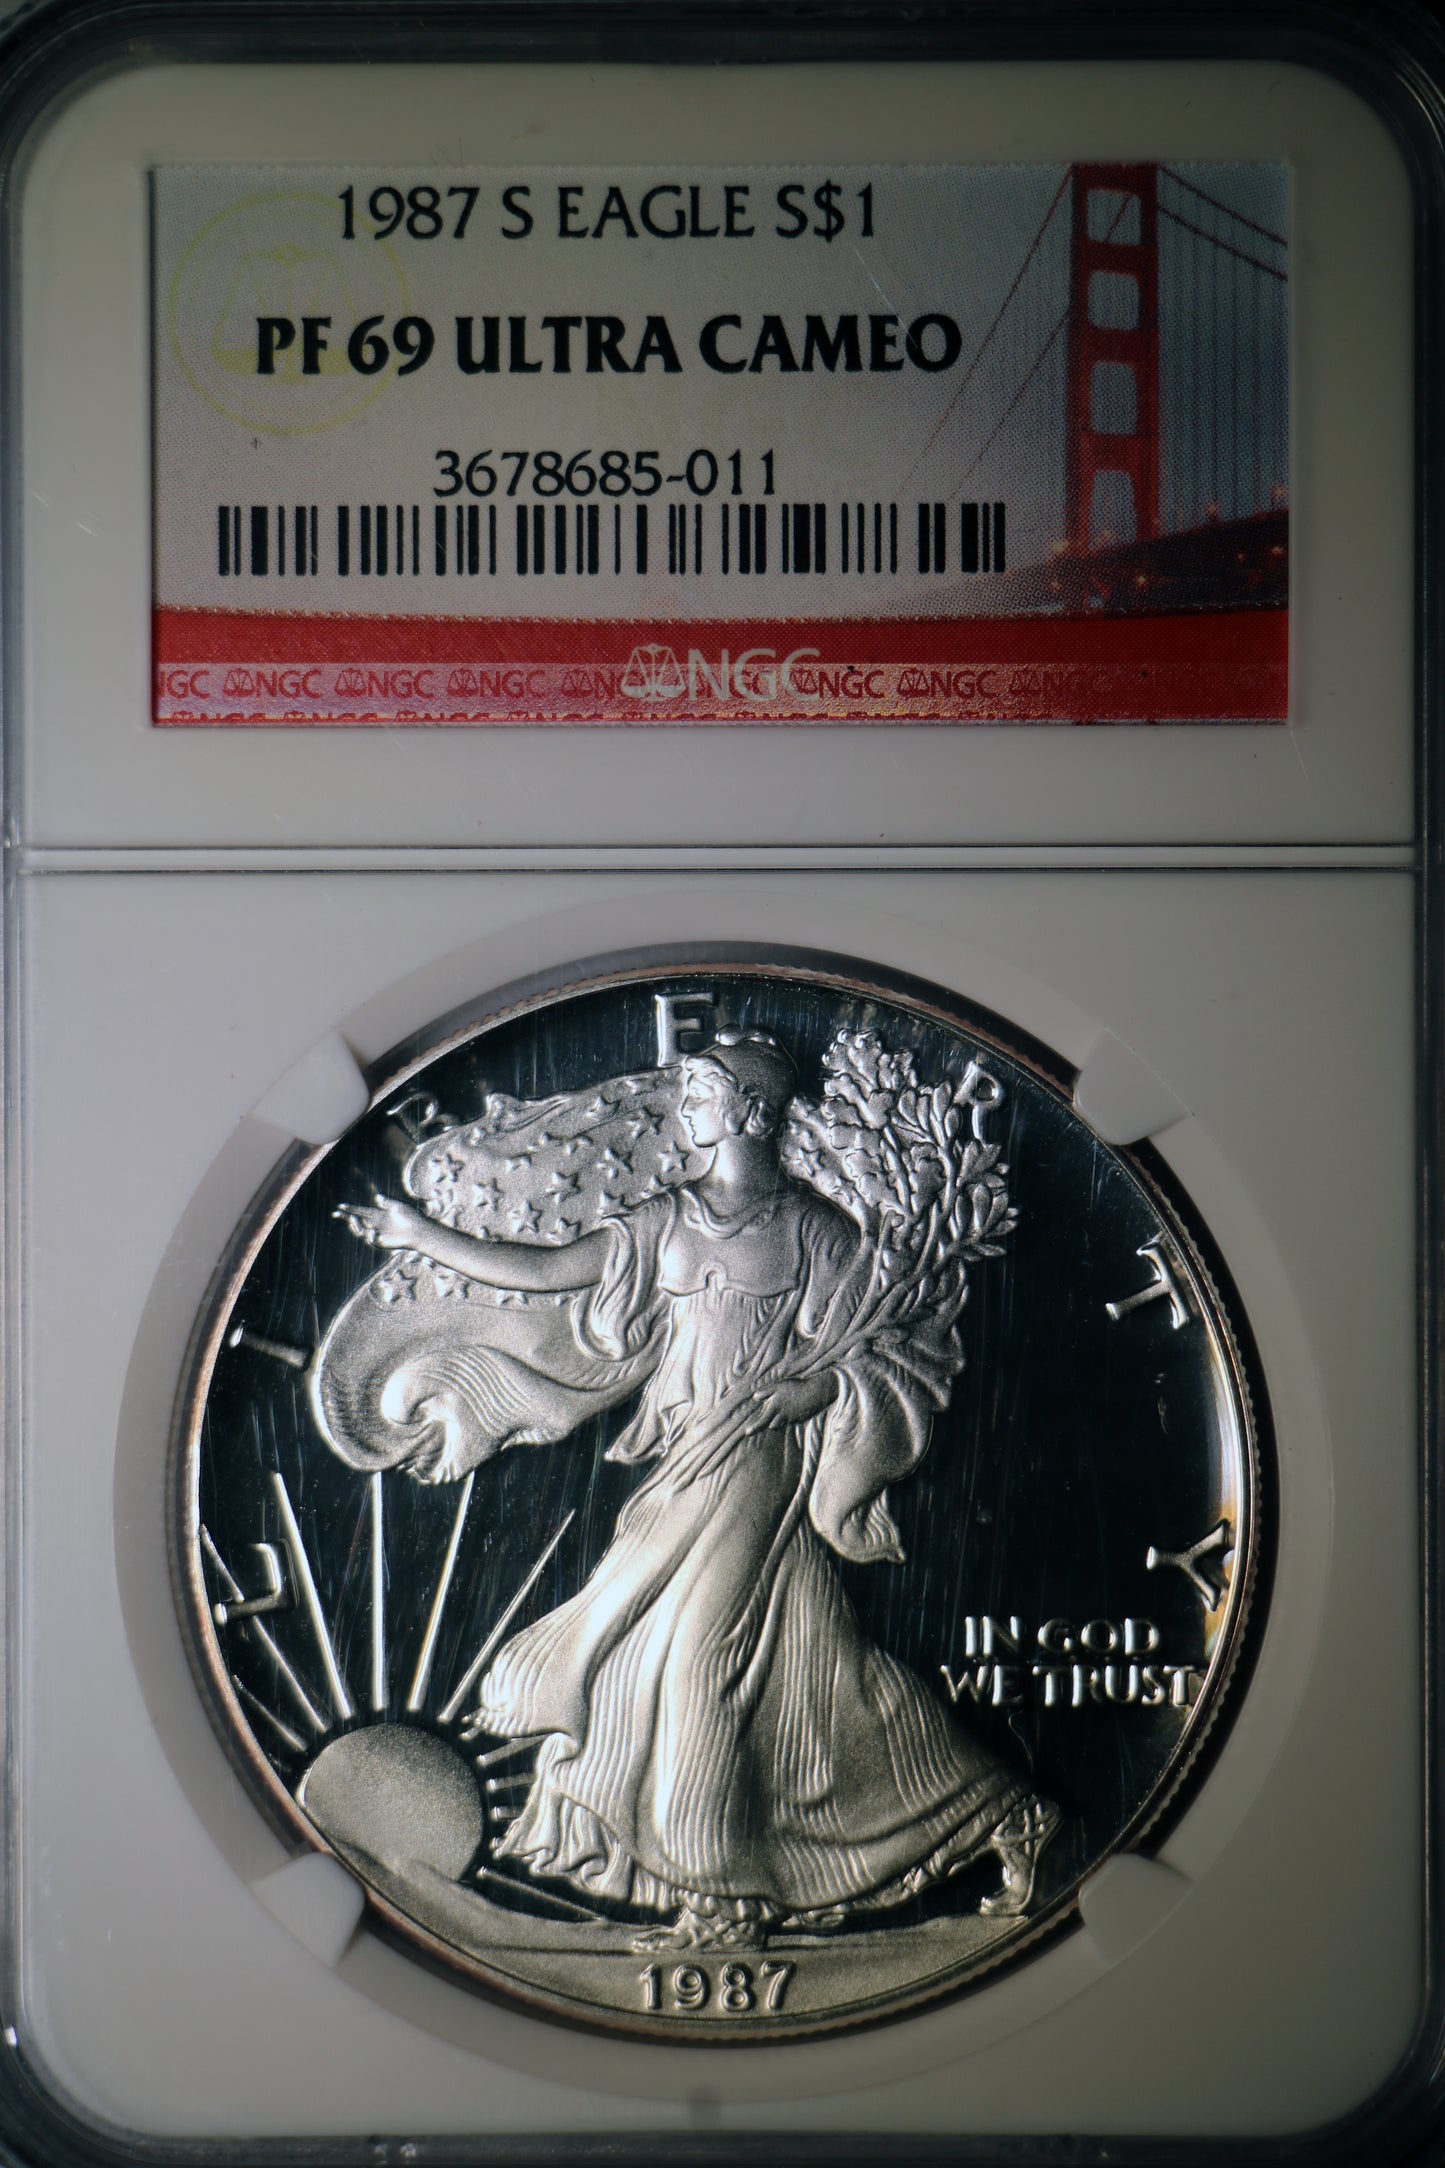 1987-S PF69 Ultra Cameo American Silver Eagle $1 NGC Golden Gate Label